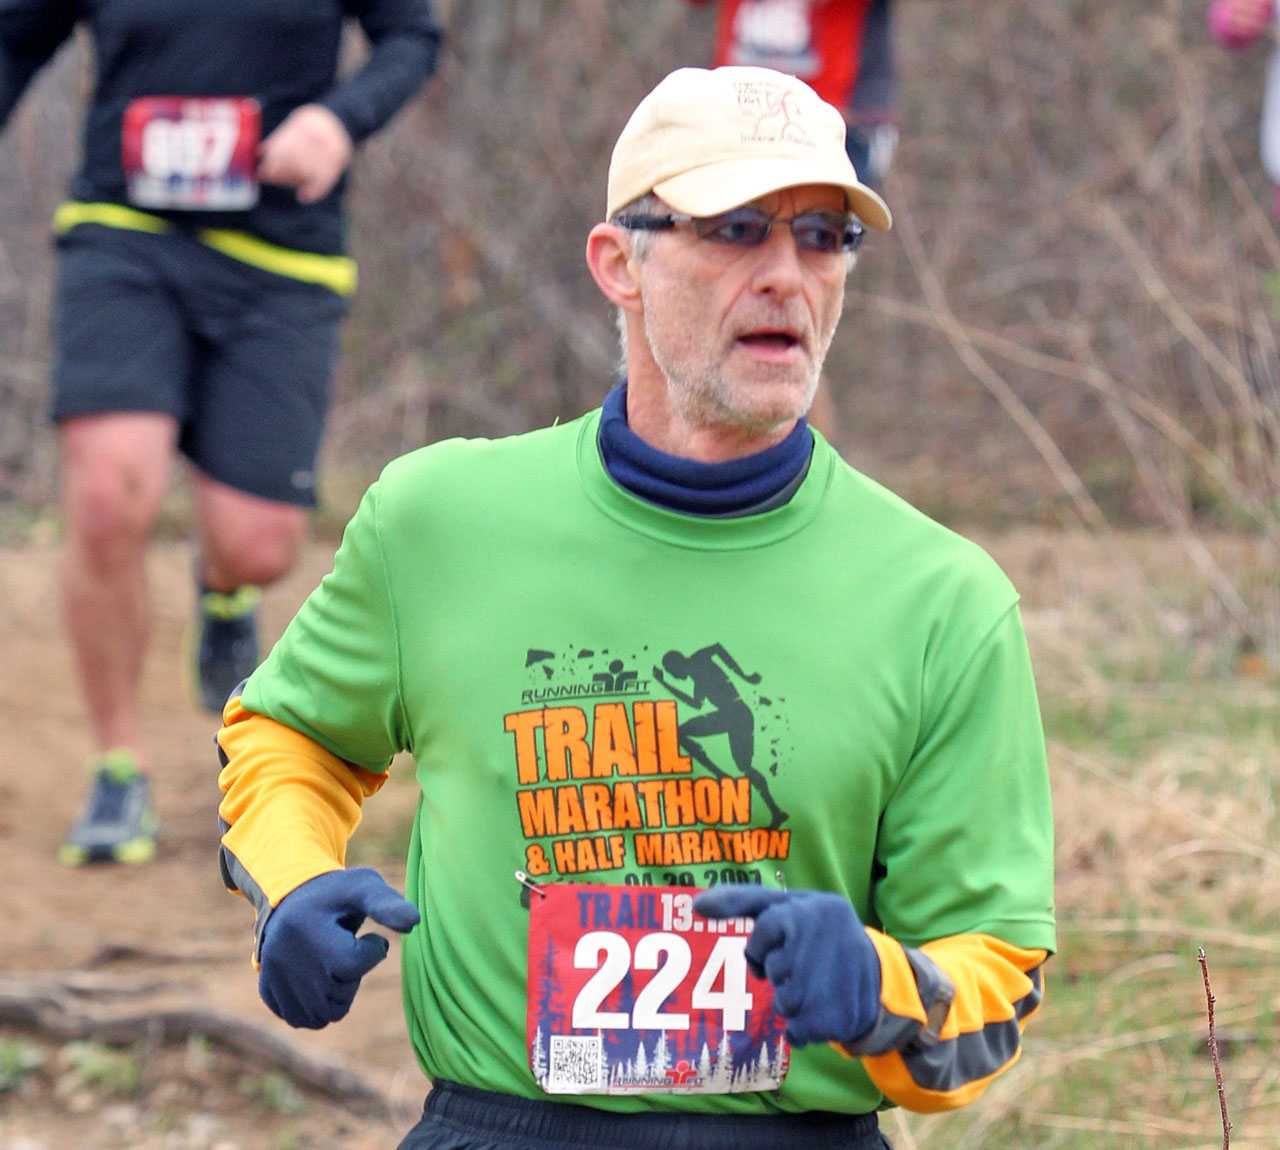 Michael is running on a dirt trail. He's dressed for warm weather with gloves and a thermal undershirt over a green race T-shirt.